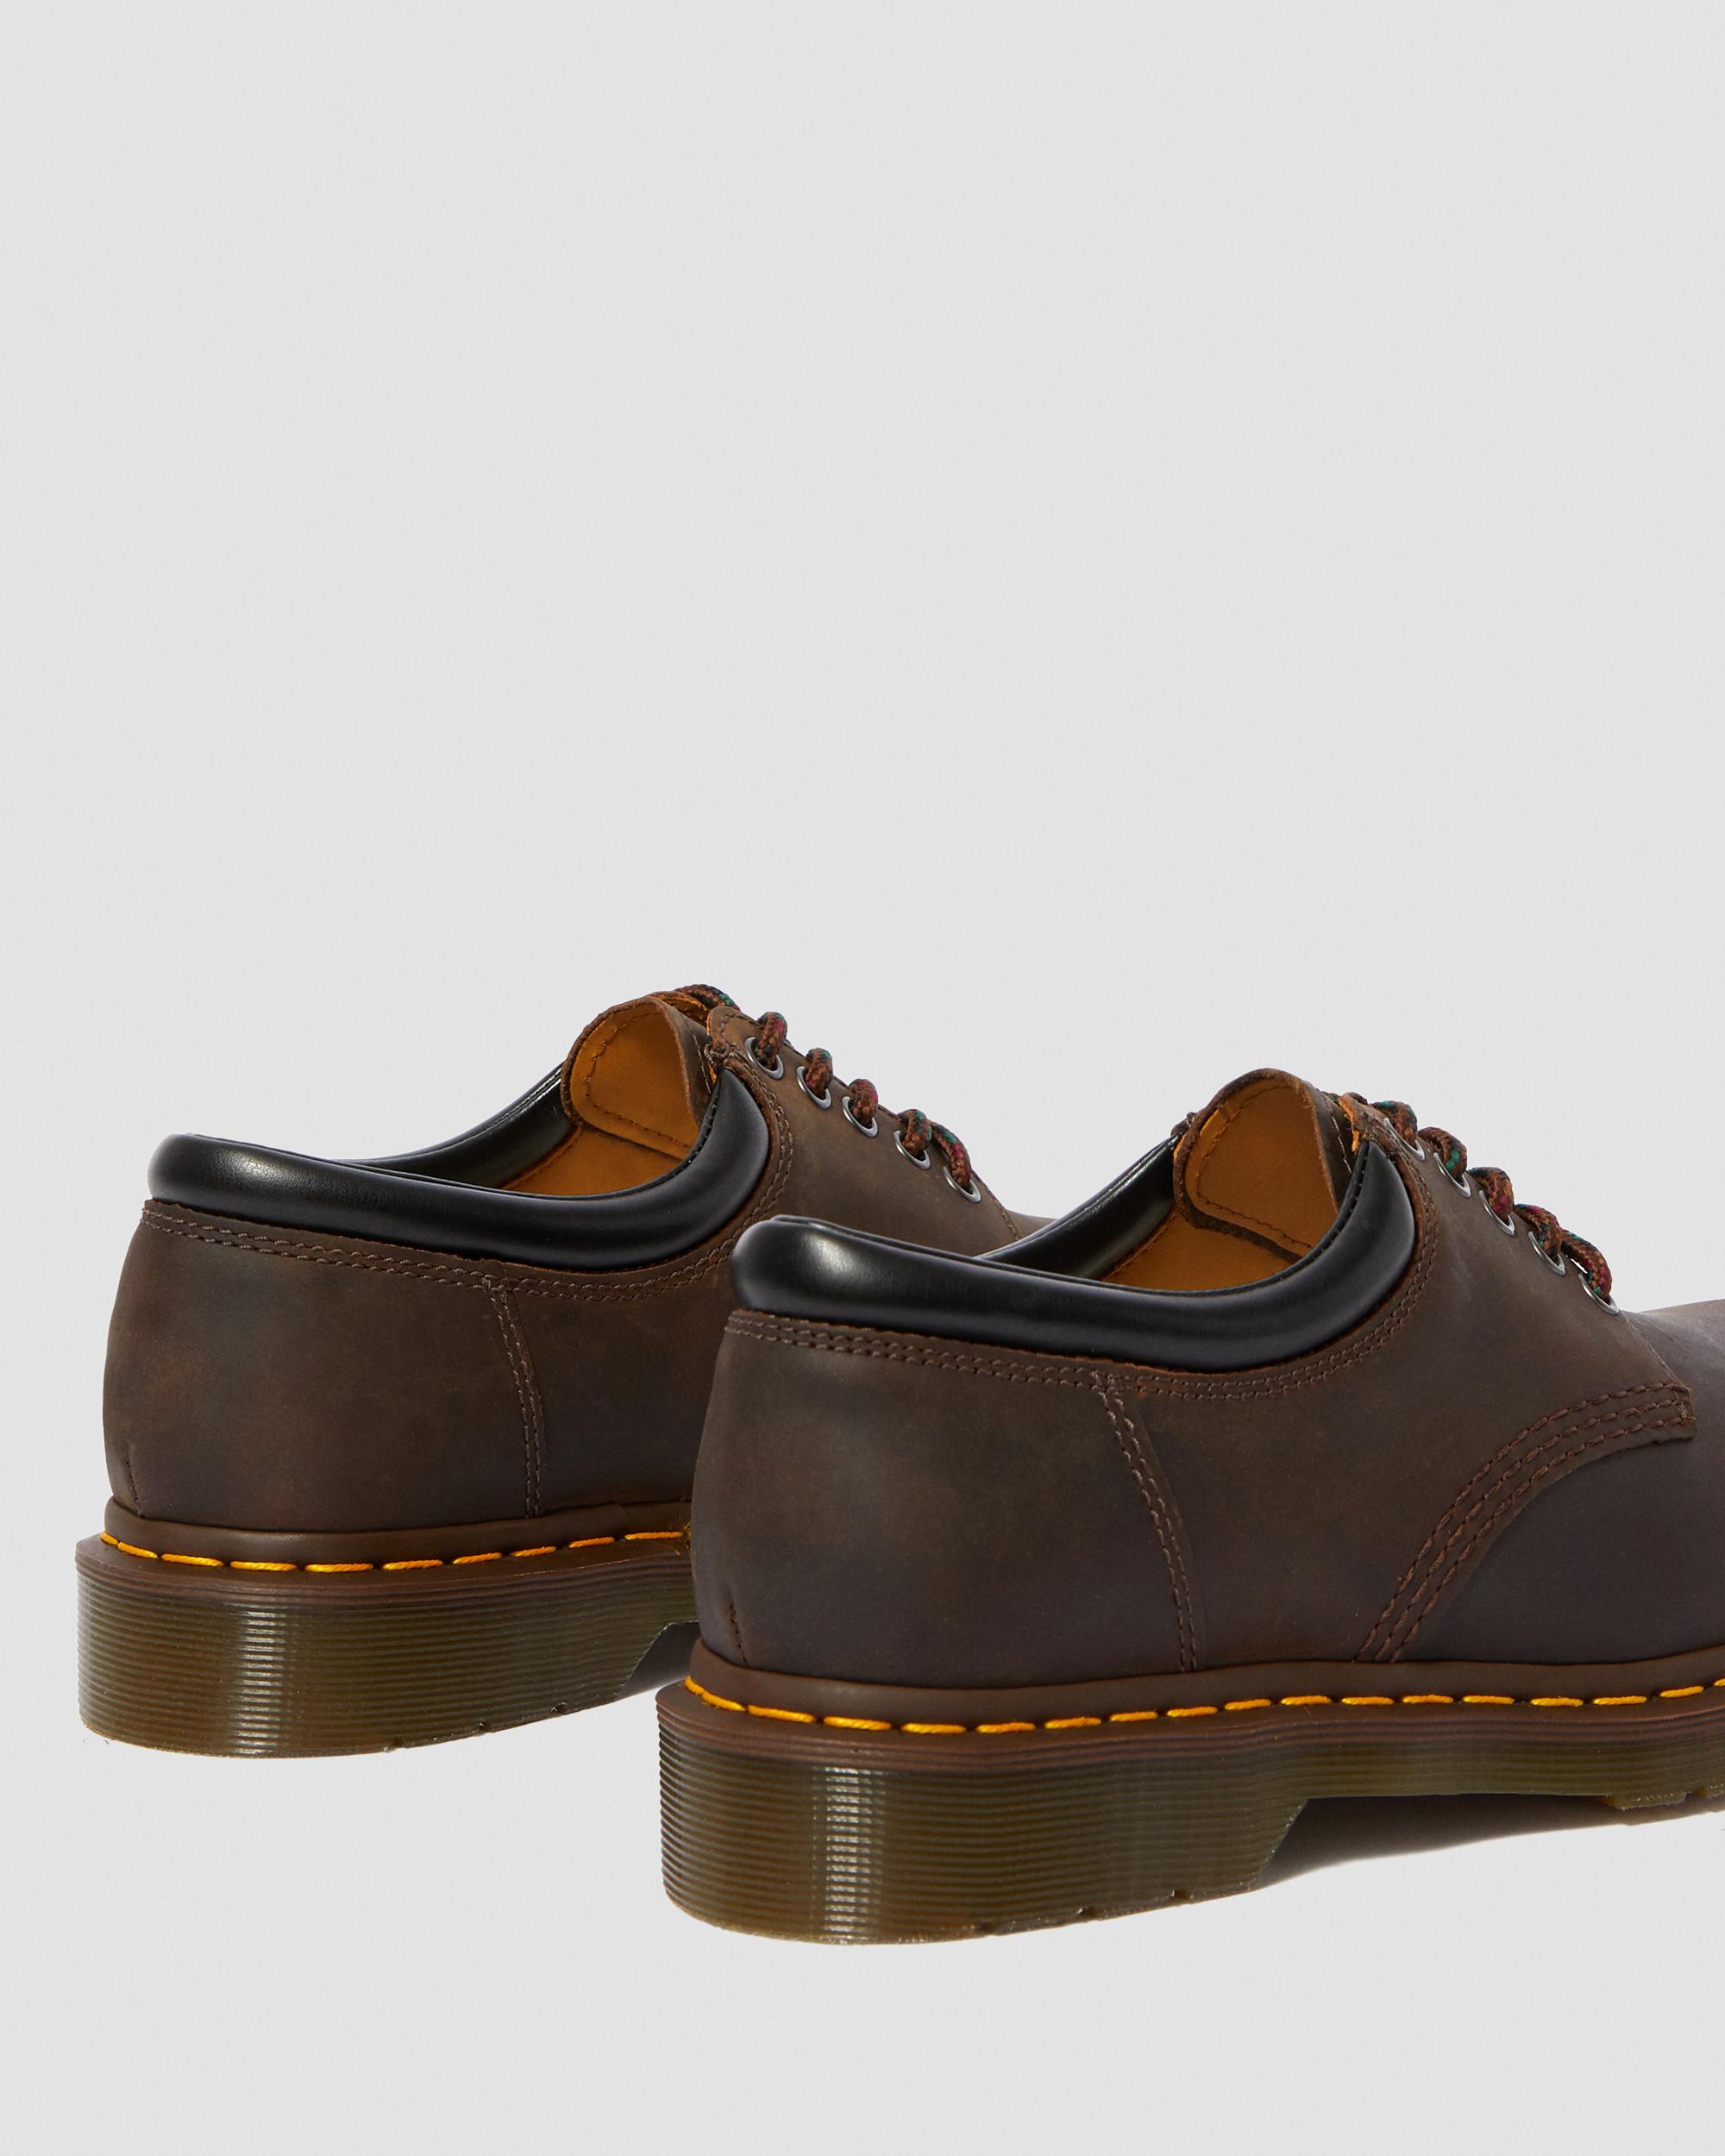 8053 Crazy Horse Leather Casual Shoes in Dark Brown